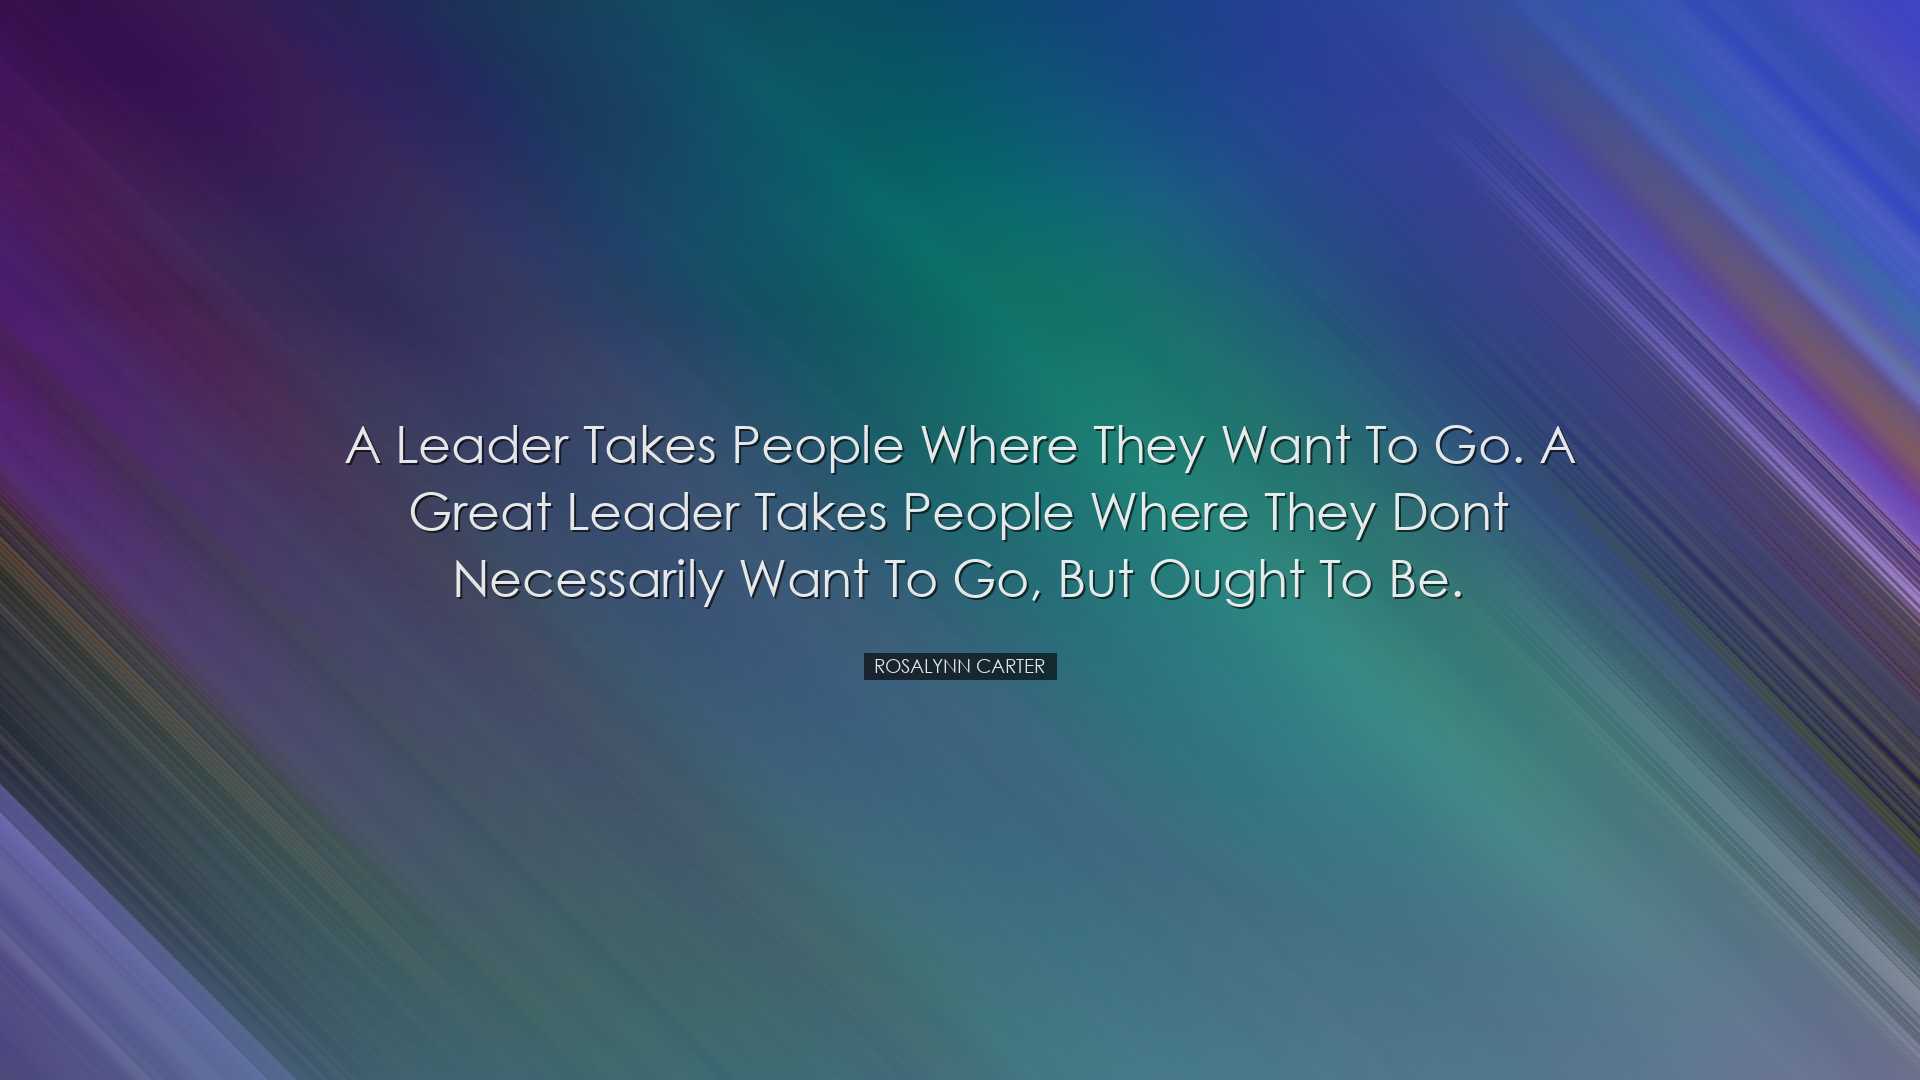 A leader takes people where they want to go. A great leader takes